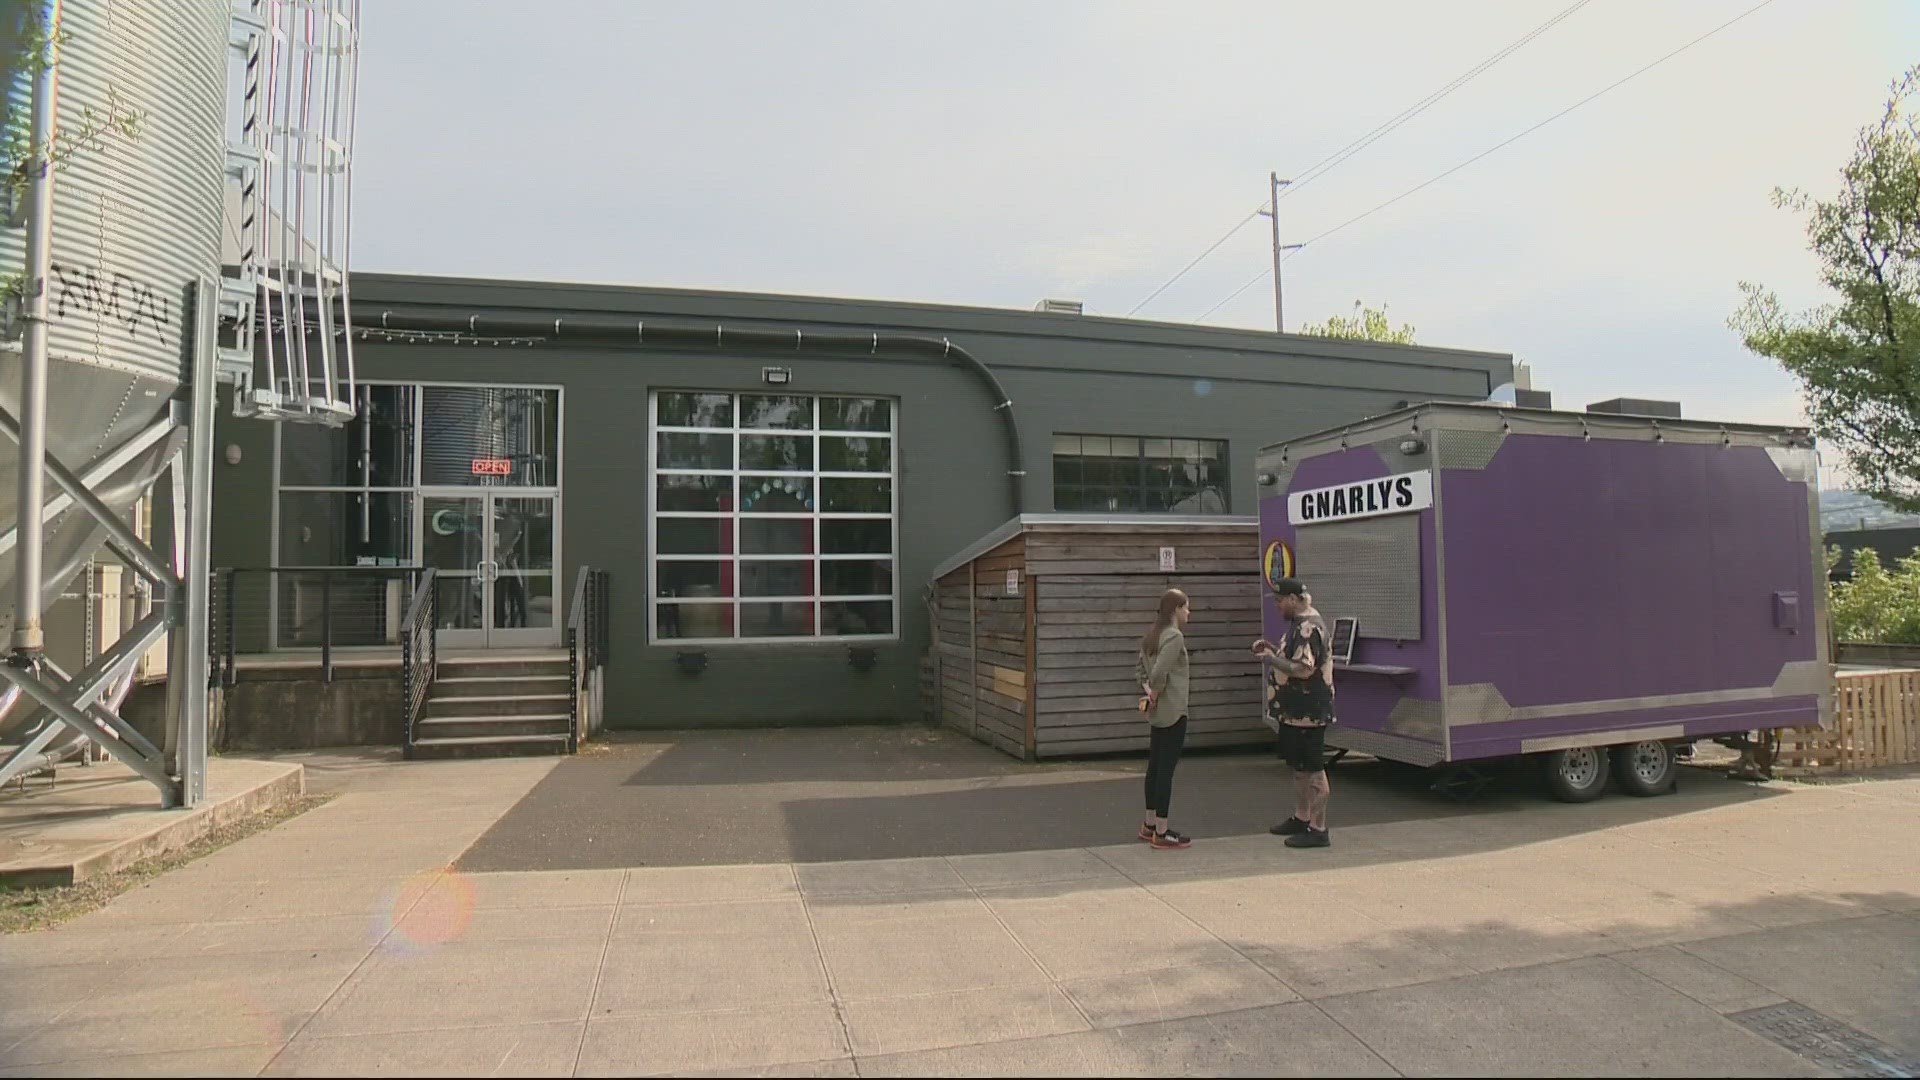 Central Eastside's "90-Day Reset" plan to clean-up the neighborhood just ended. While some are calling it a success, one business owner is dealing with break-ins.